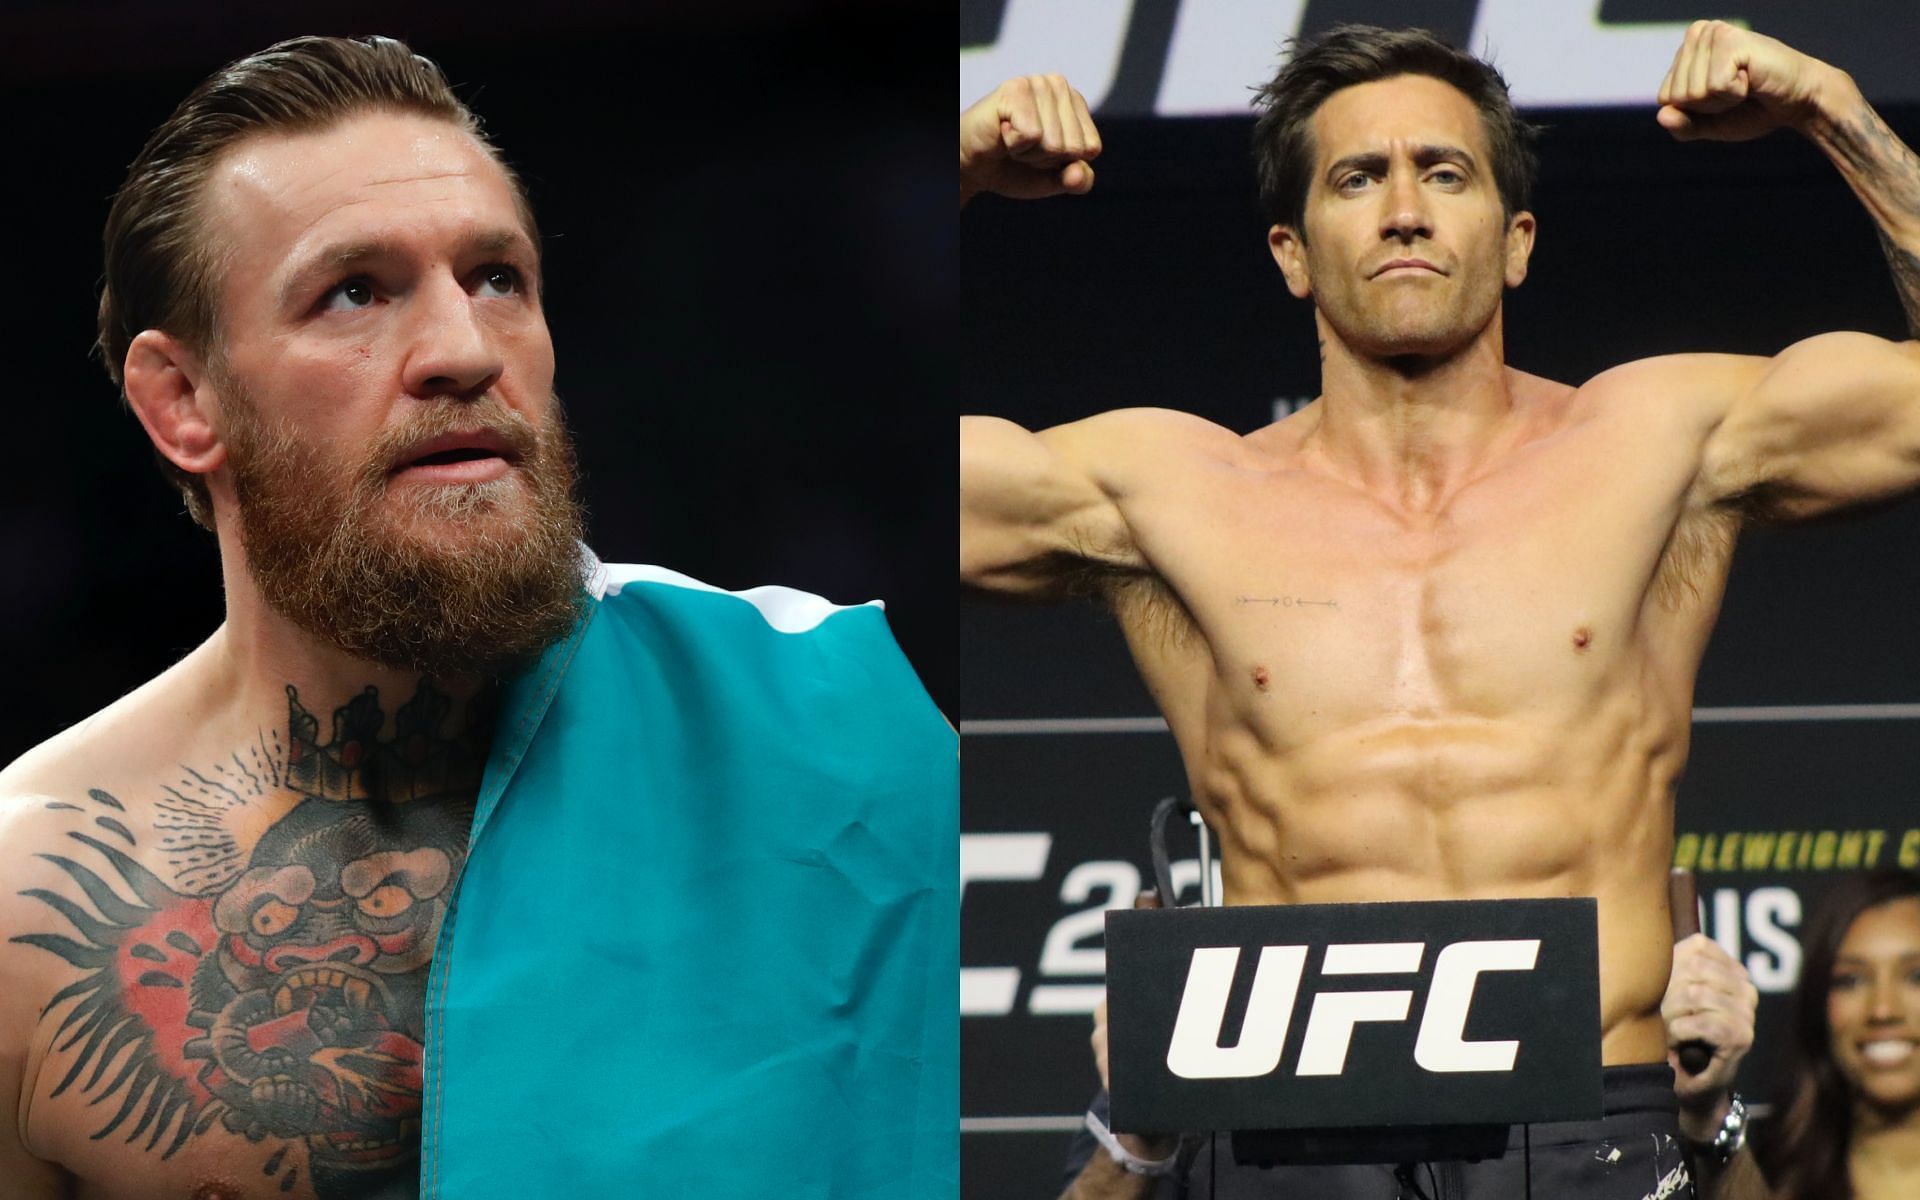 Conor McGregor (left) and Jake Gyllenhaal (right) [Image credits: Getty Images and @AlexBehunin on Twitter]  